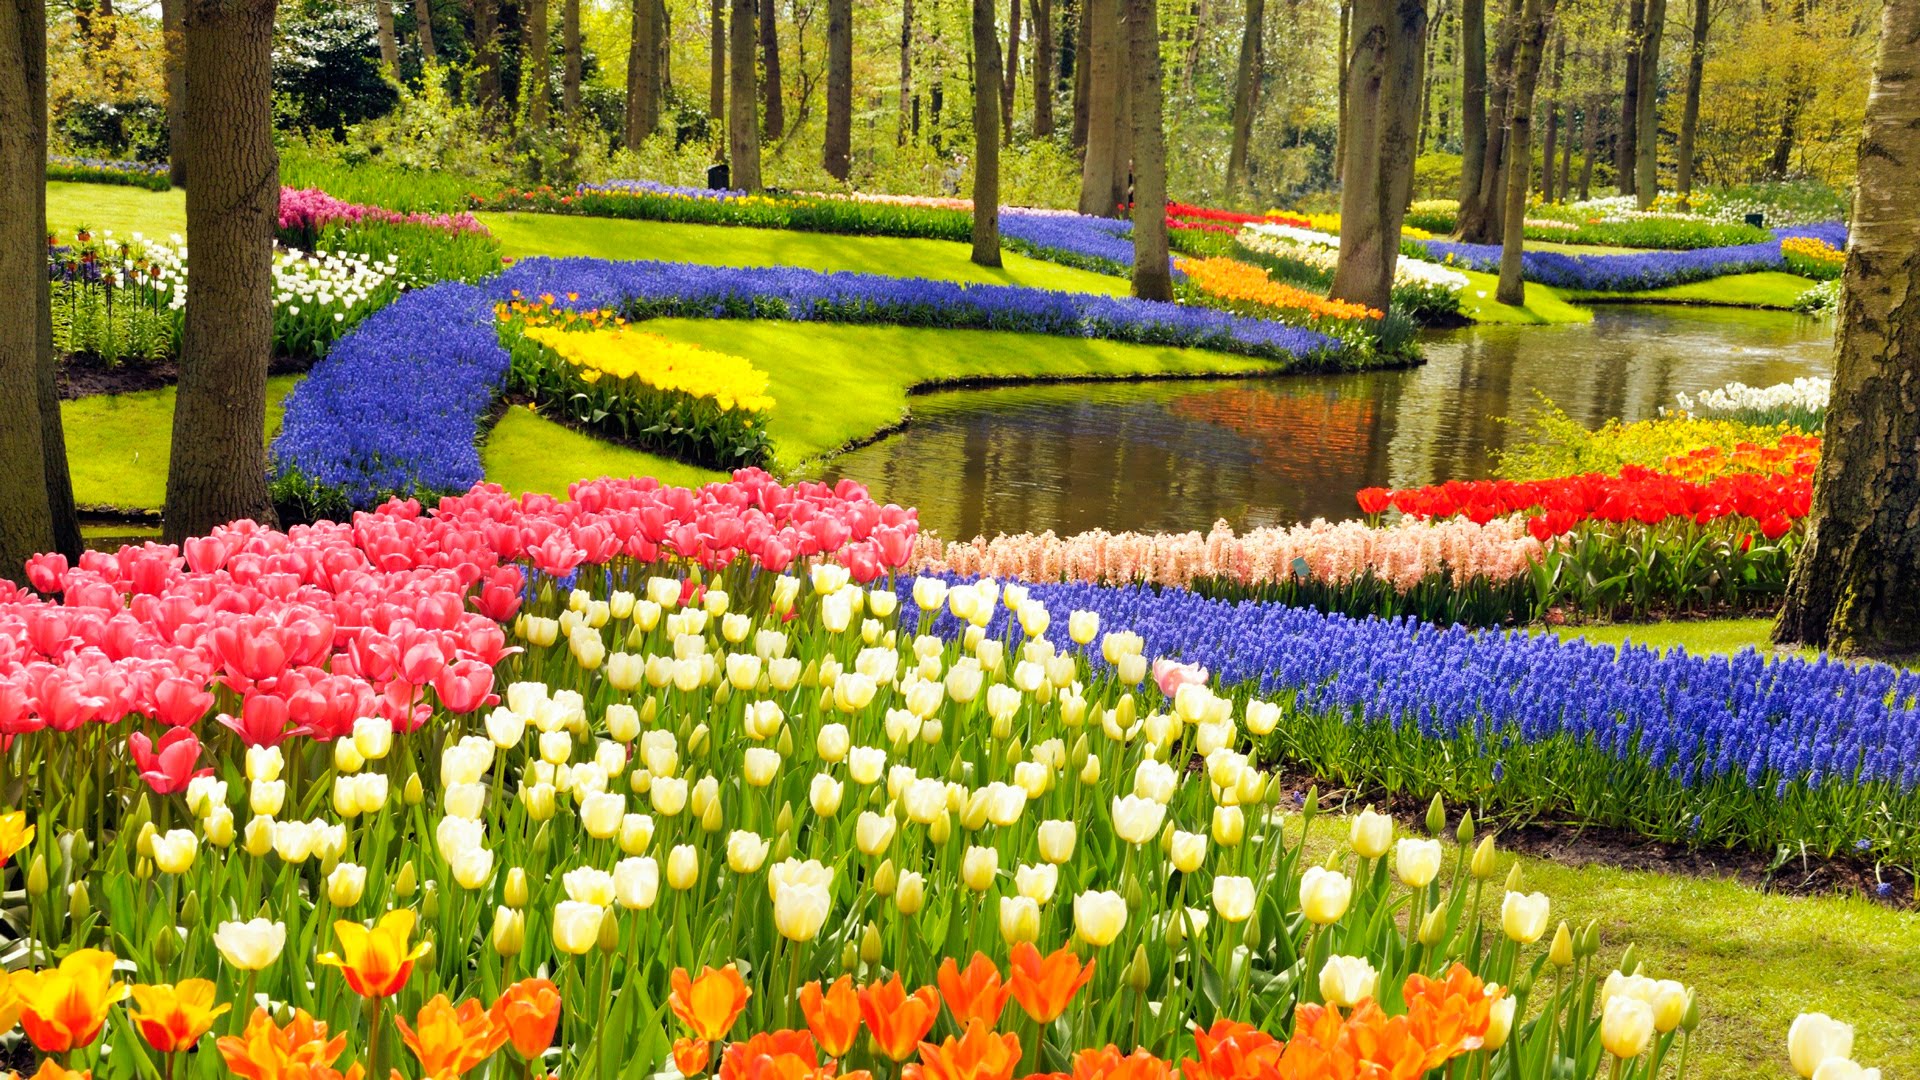 Keukenhof, A Haven of Tulips in Amsterdam, The Netherlands